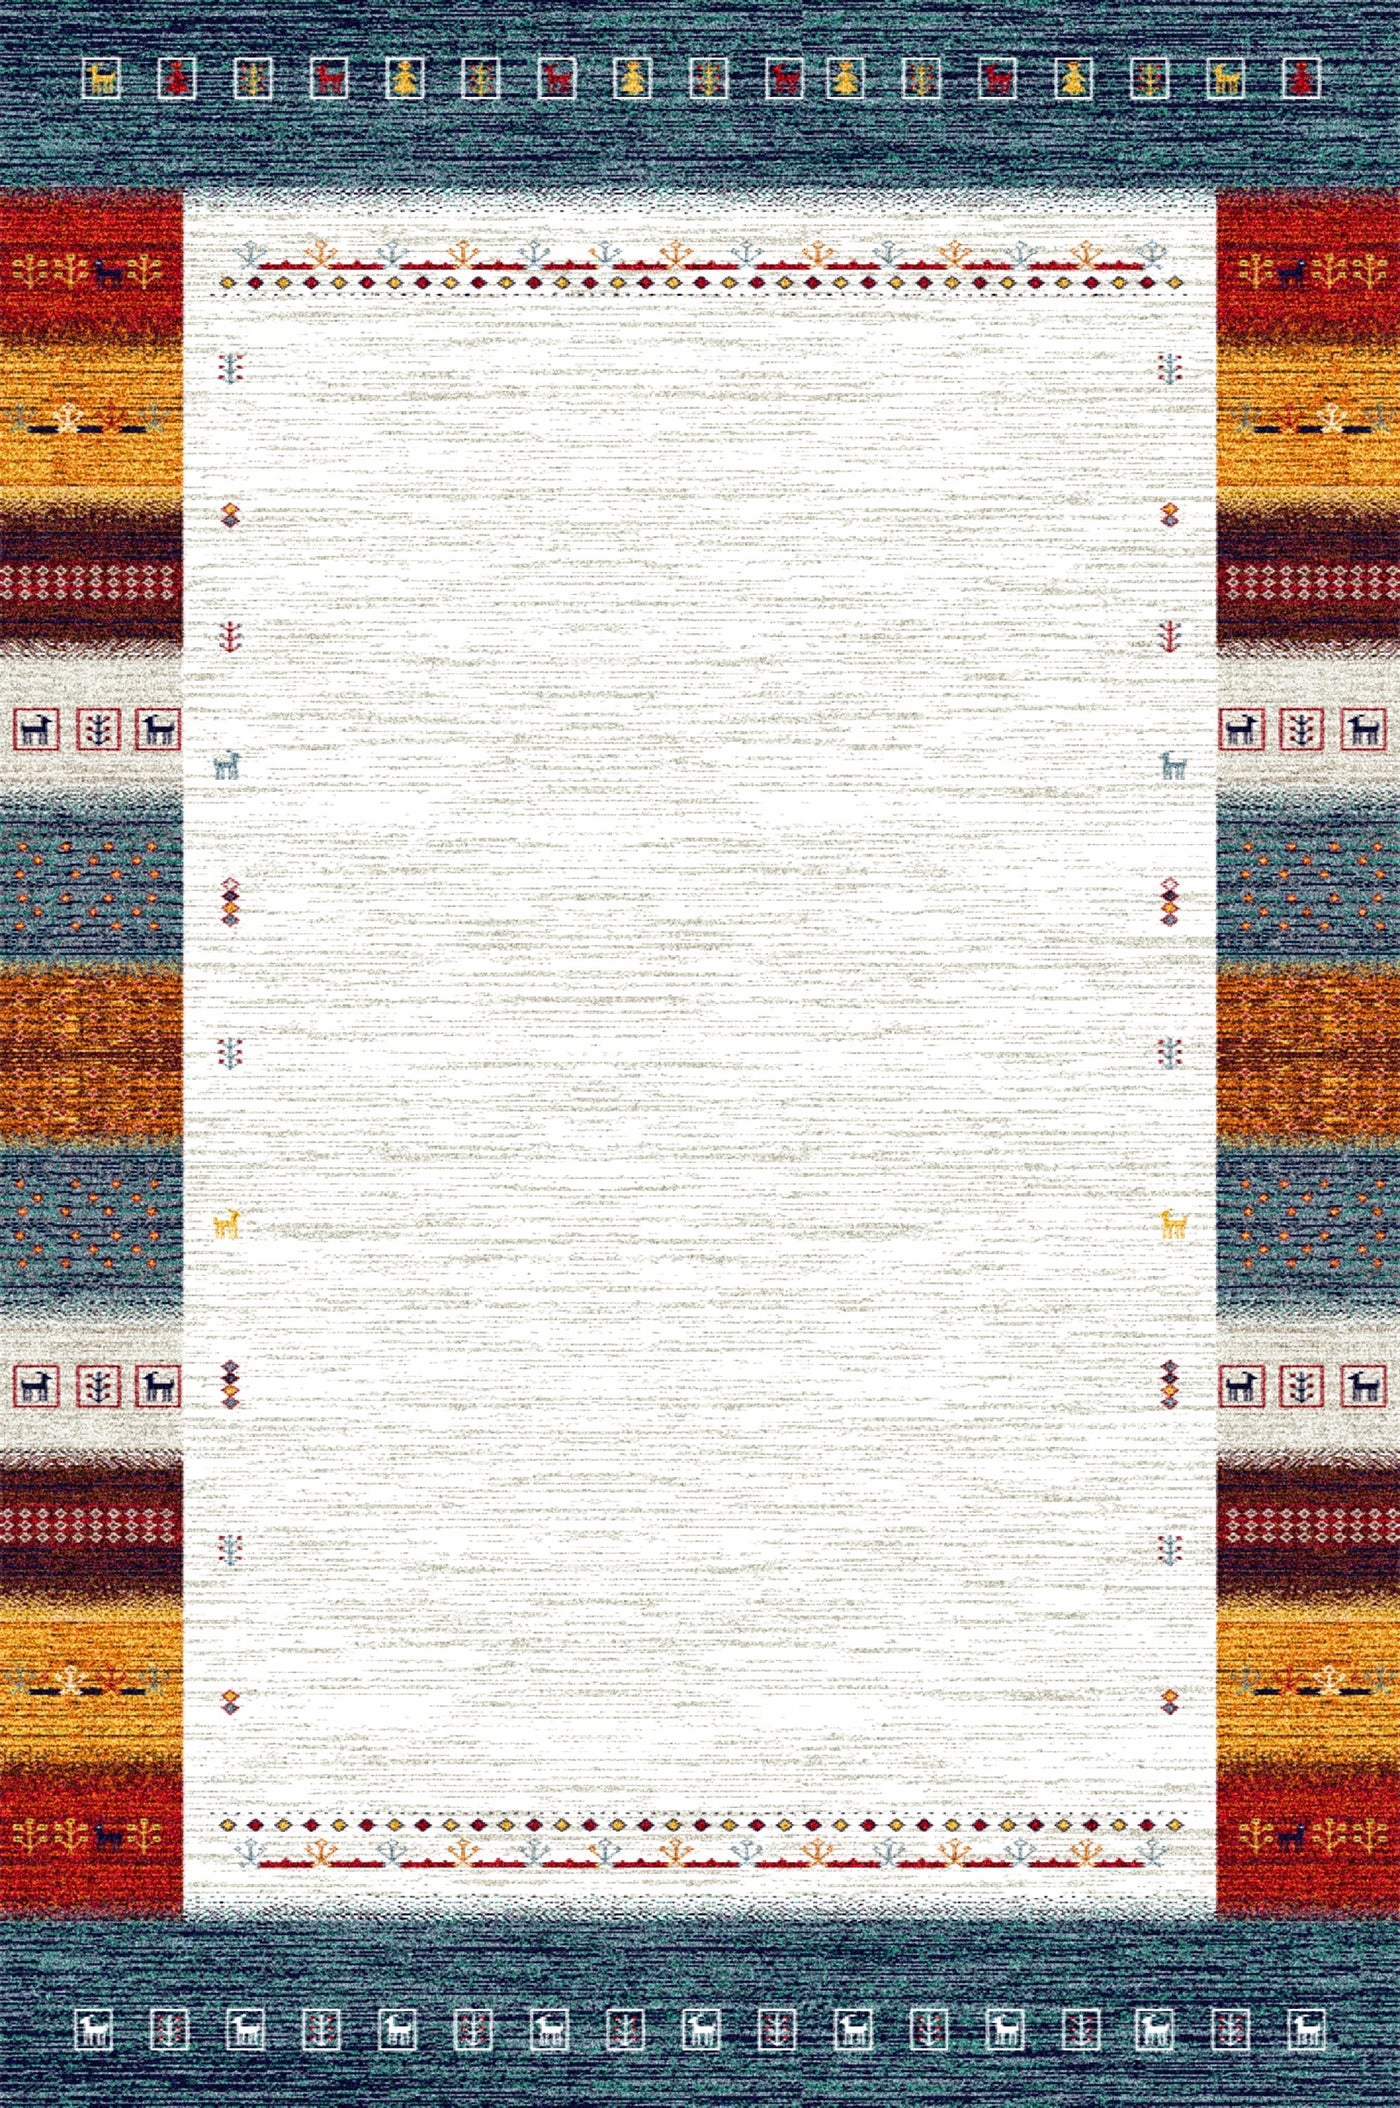 Rectangular rug with a white center, bordered by colorful geometric patterns and small animal motifs in red, orange, yellow, and blue